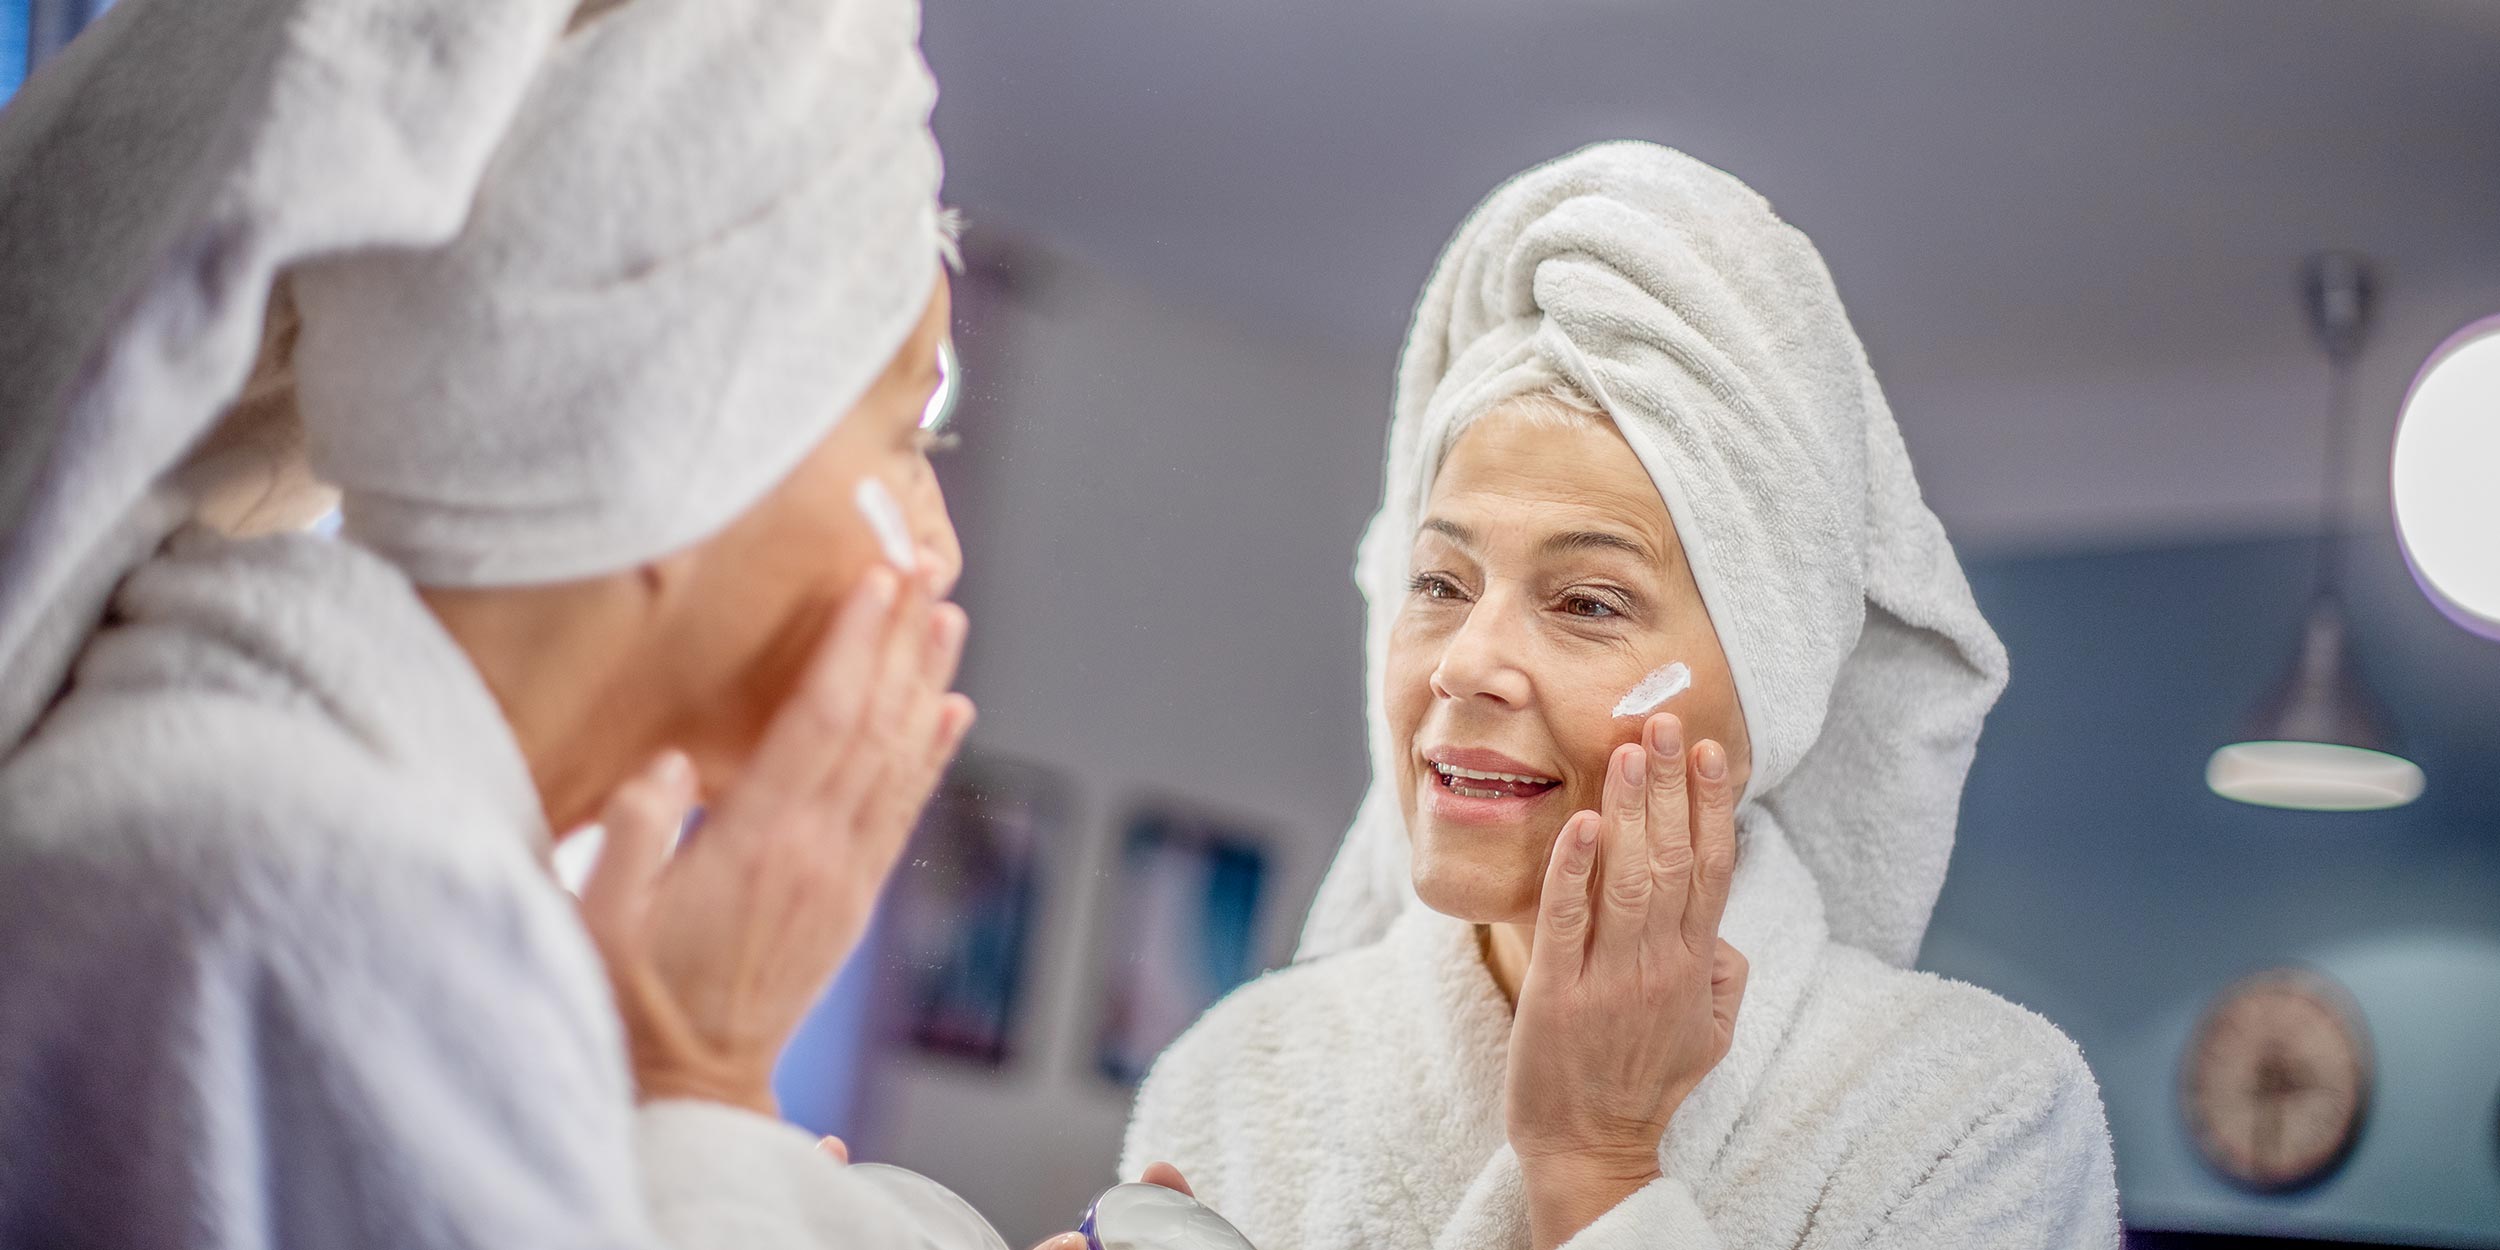 You should be aware of anti-aging cream benefits